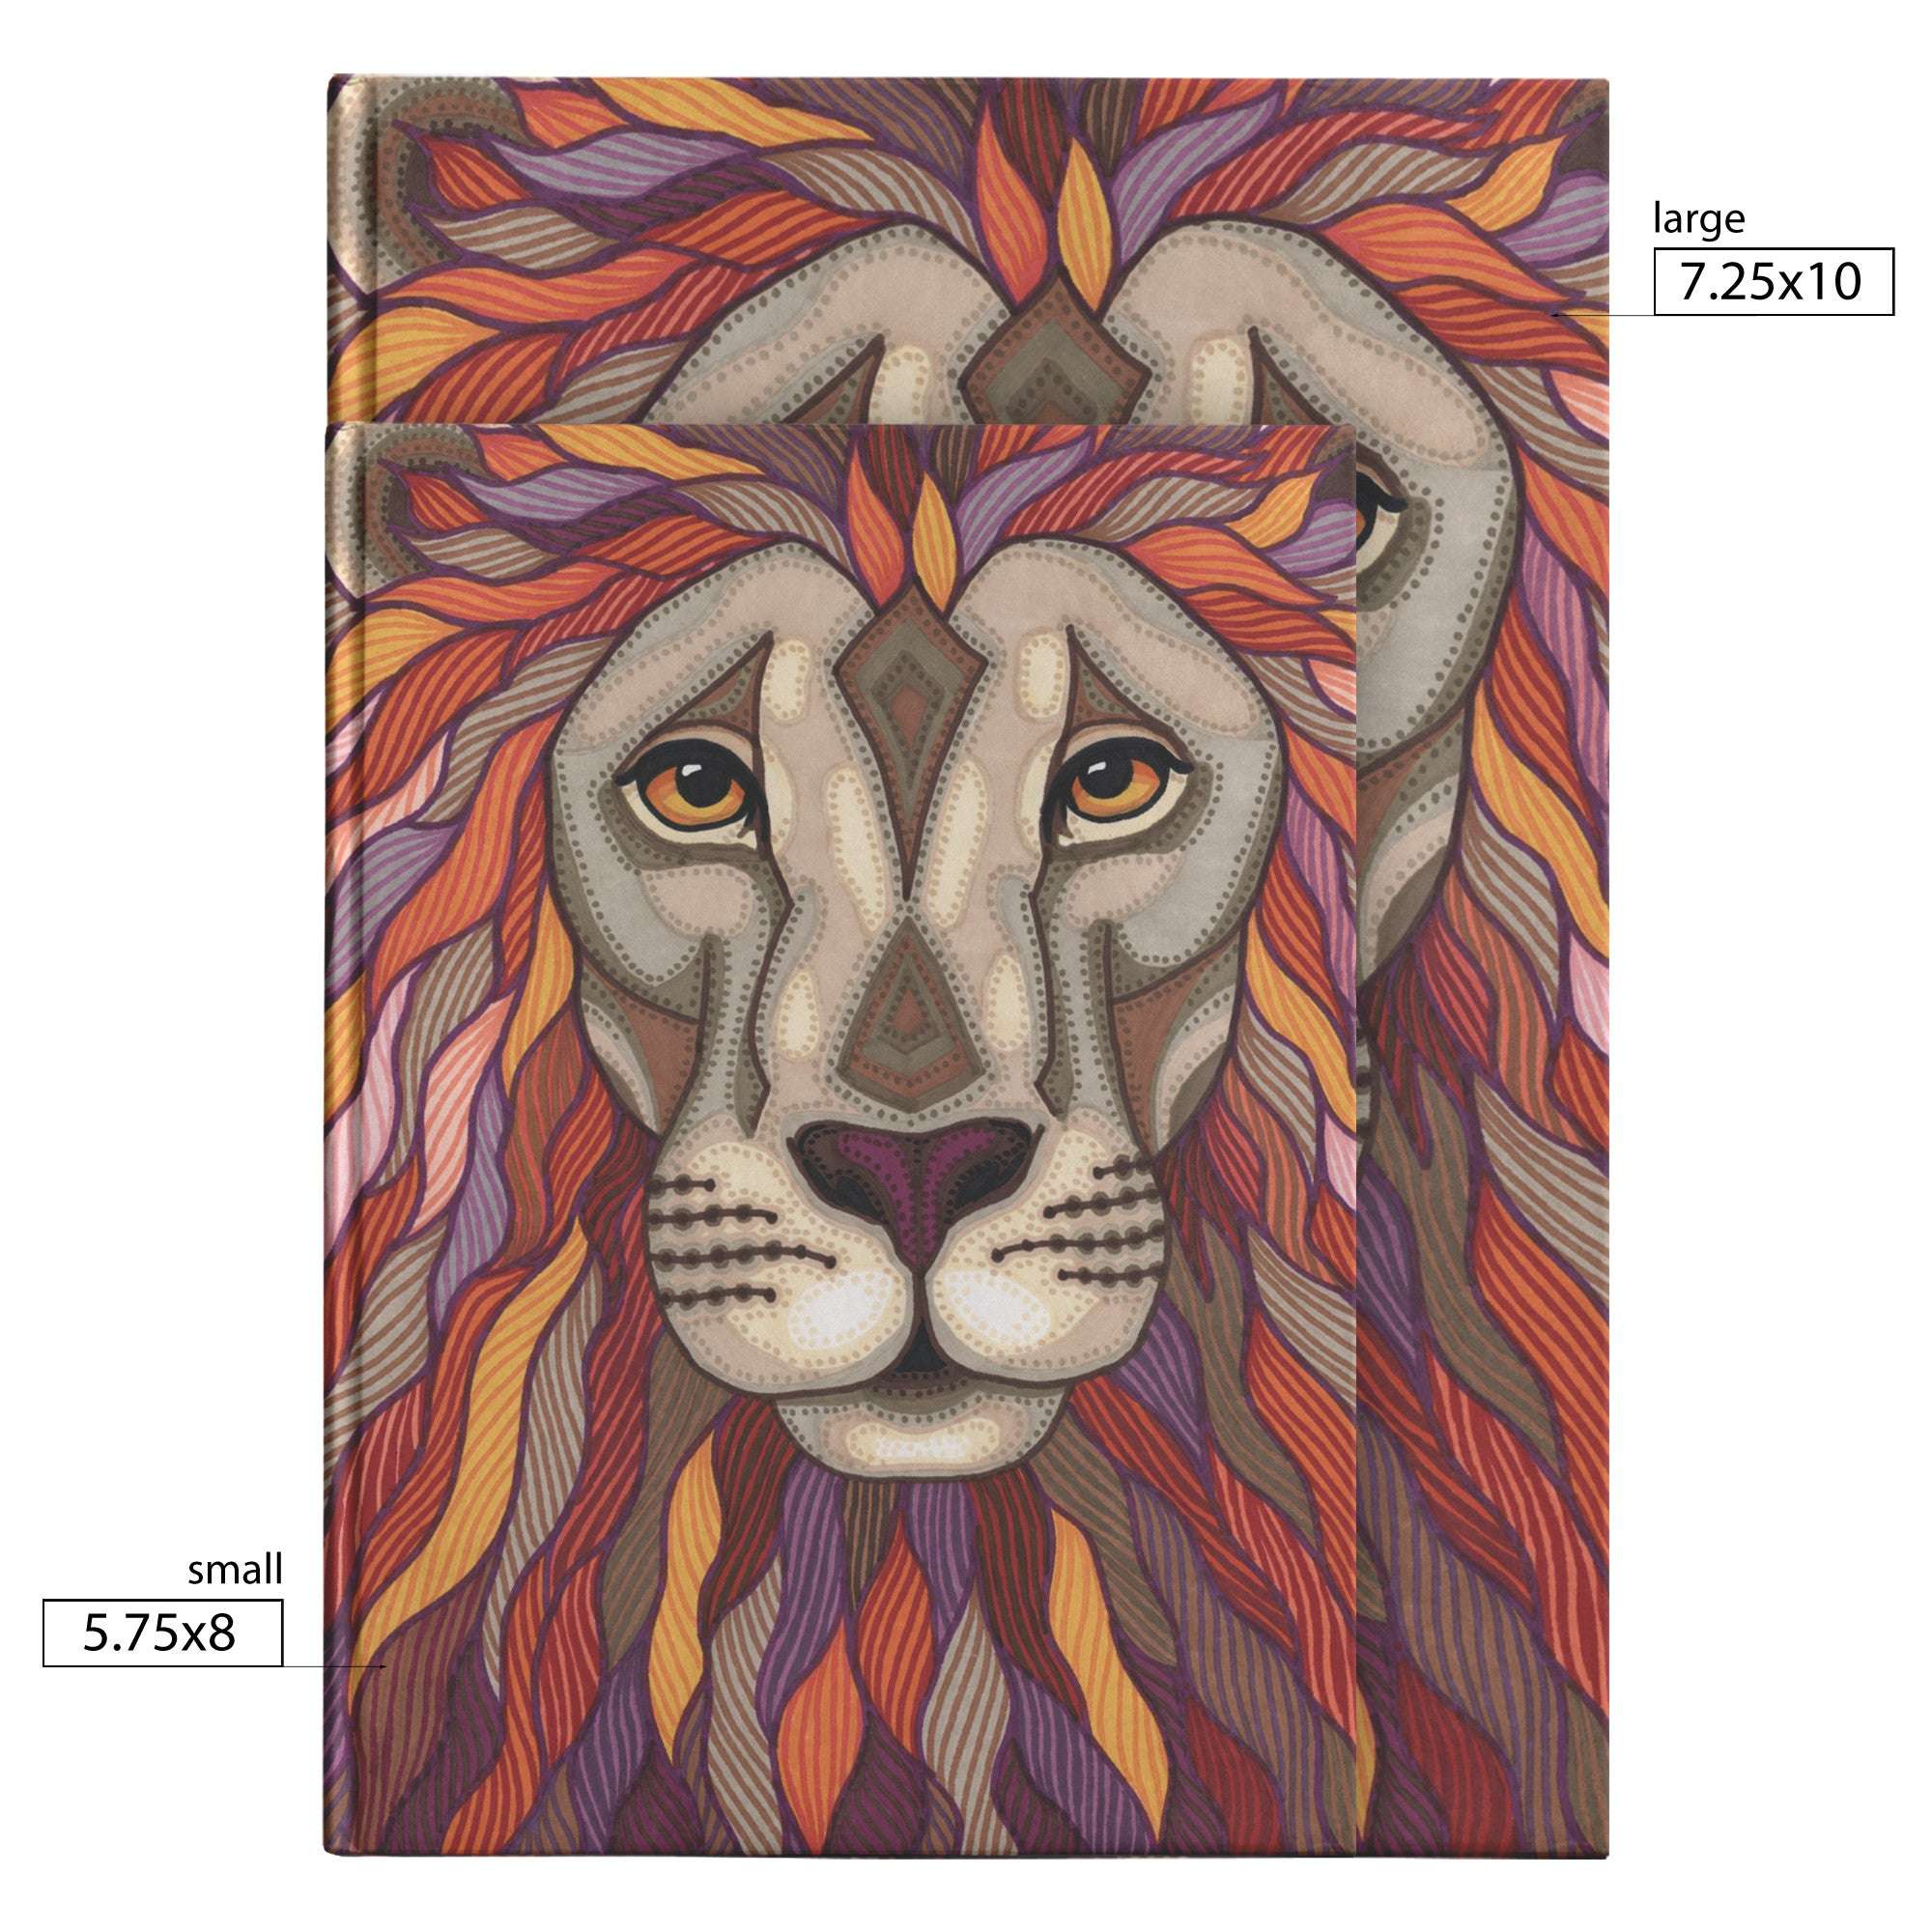 A colorful illustrated Lion Pride Journal featuring a detailed lion's face surrounded by stylized leaves, available in two sizes labeled as "small" and "large.